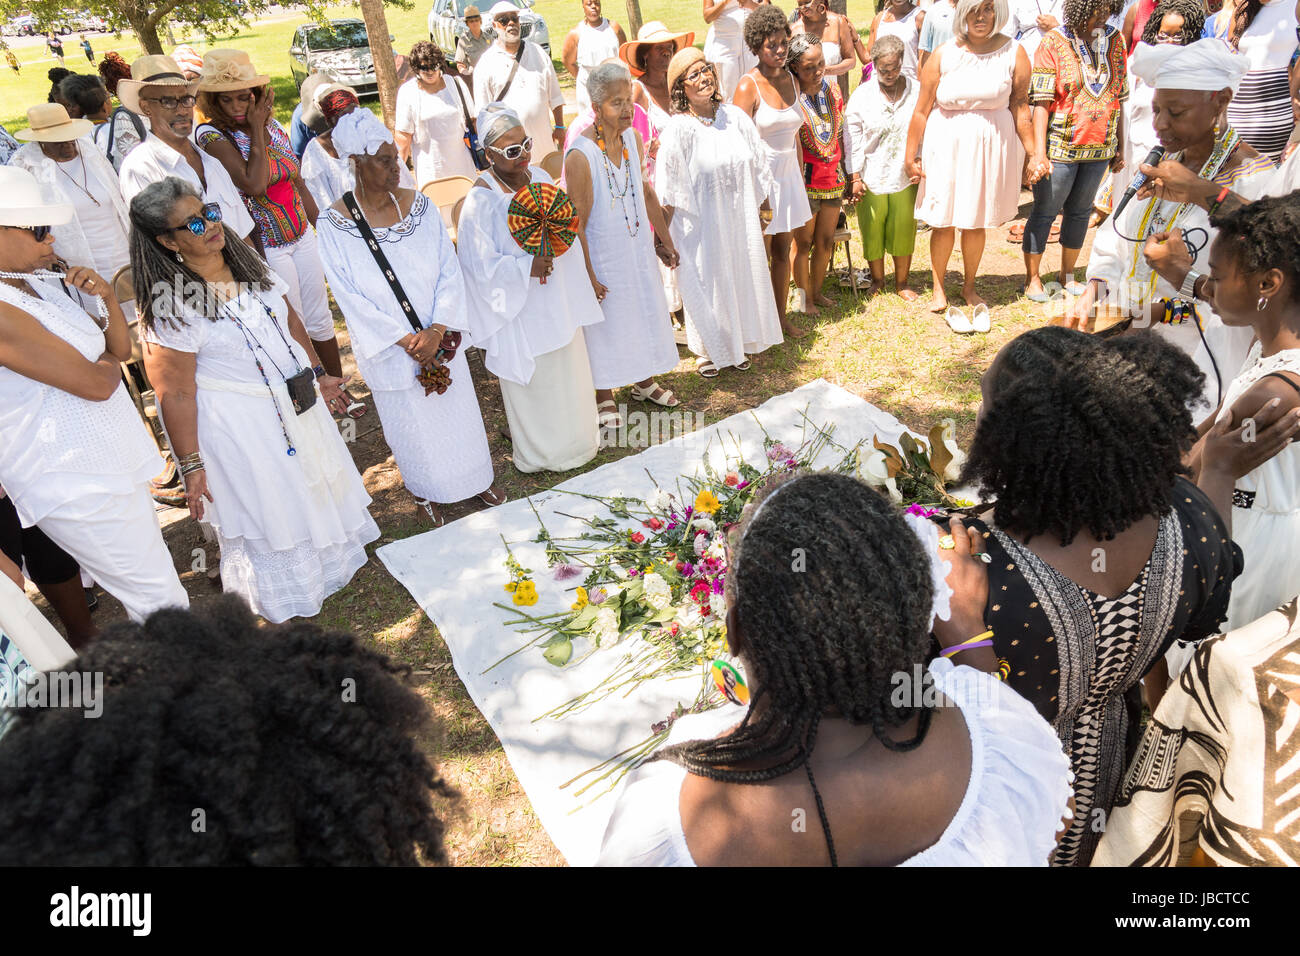 Descendants of enslaved Africans brought to Charleston in the Middle Passage hold a prayer service during a remembrance ceremony at Fort Moutrie National Monument June 10, 2017 in Sullivan's Island, South Carolina. The Middle Passage refers to the triangular trade in which millions of Africans were shipped to the New World as part of the Atlantic slave trade. An estimated 15% of the Africans died at sea and considerably more in the process of capturing and transporting. The total number of African deaths directly attributable to the Middle Passage voyage is estimated at two million Africans. Stock Photo